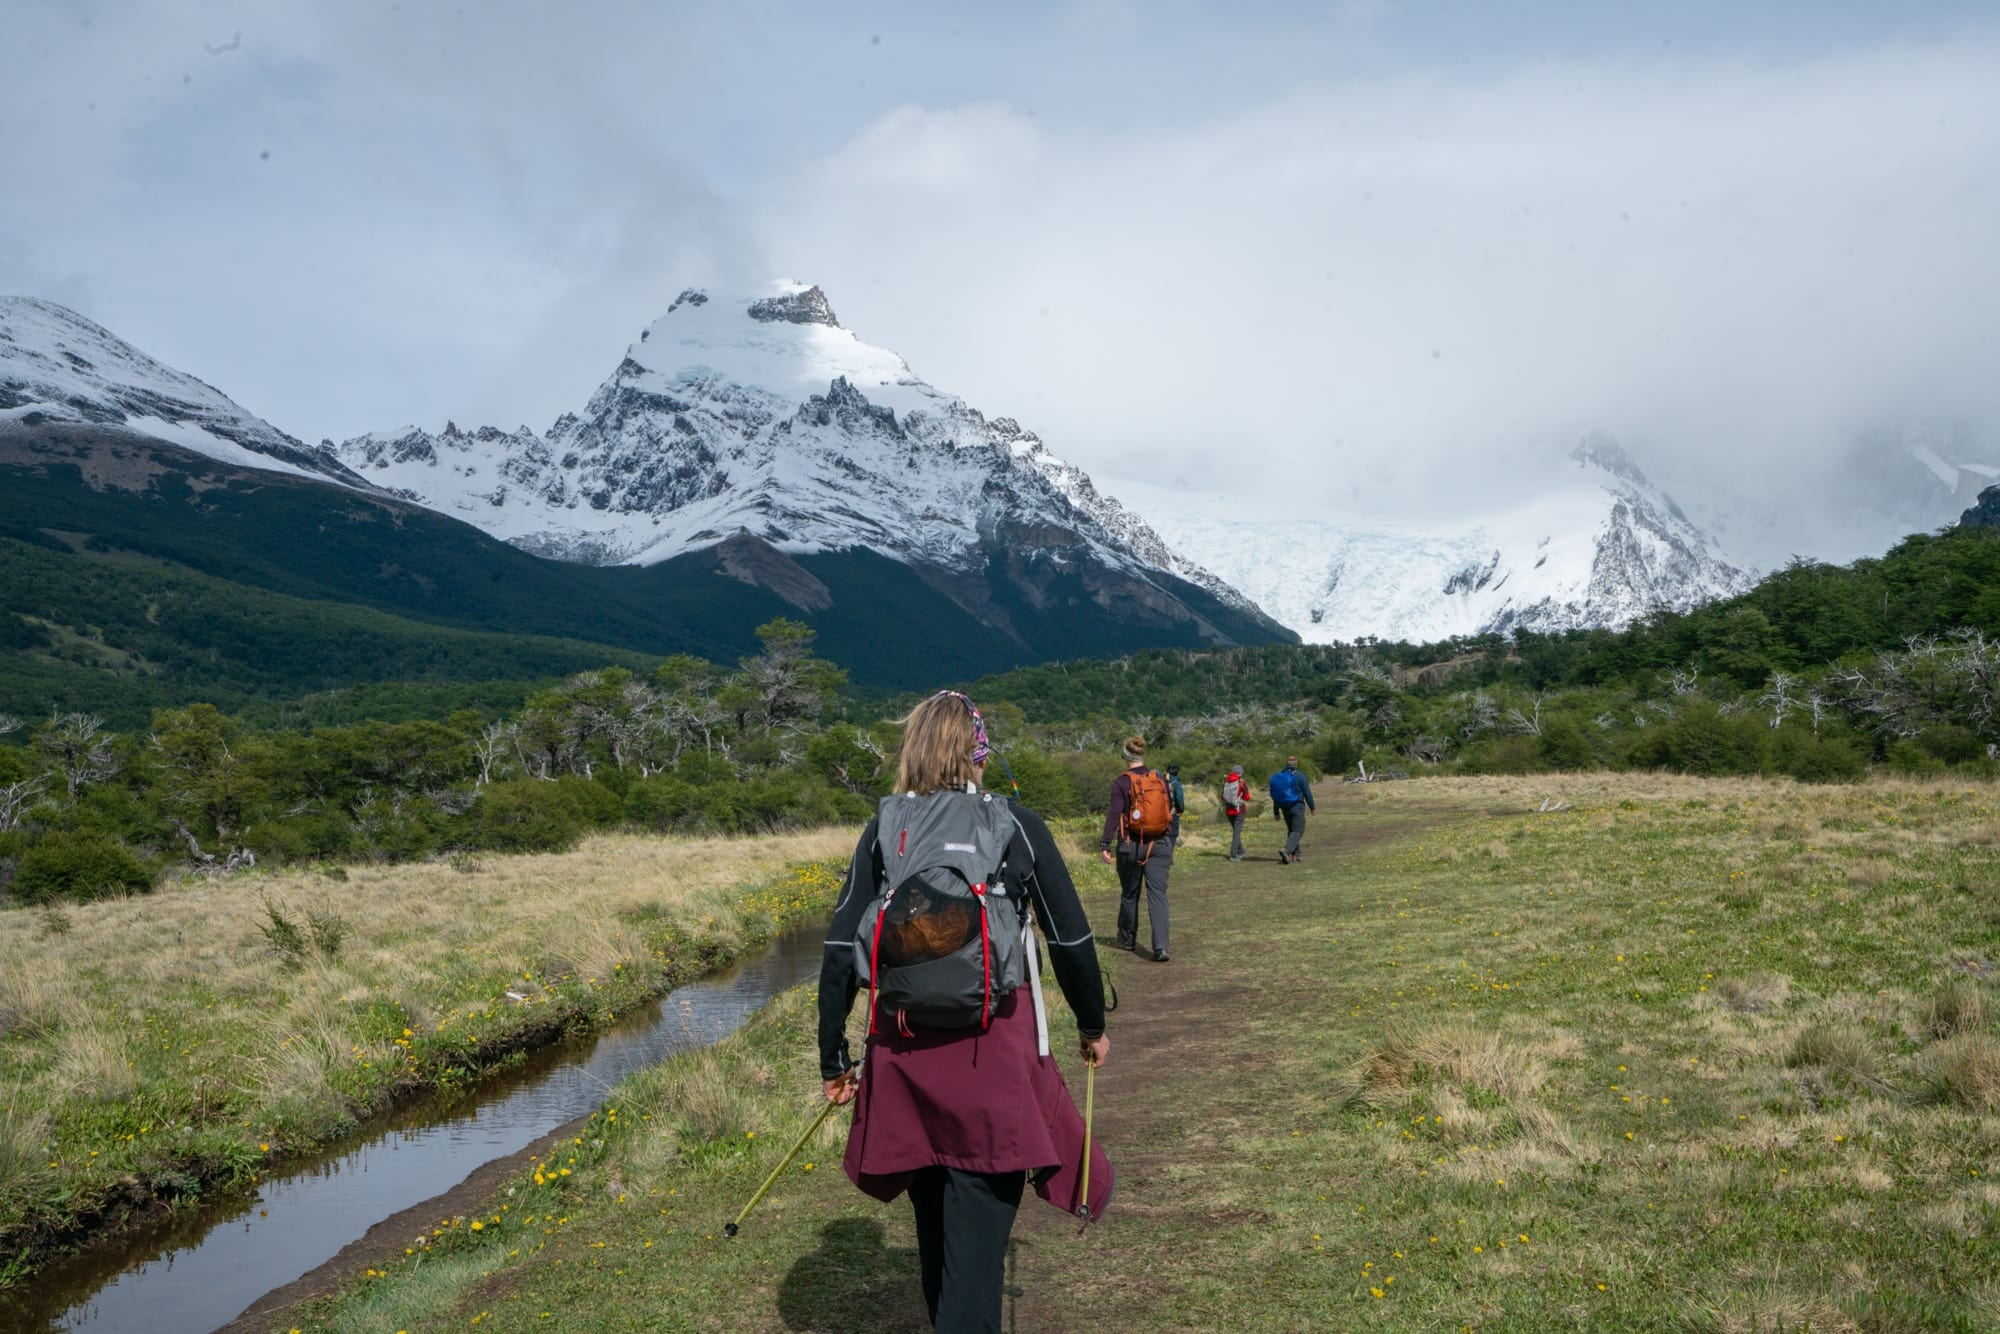 Discover hiking, white water rafting, the Fitz Roy, and other beautiful landscapes in this bucketlist Patagonia destination with our 4-day El Chaltén itinerary.